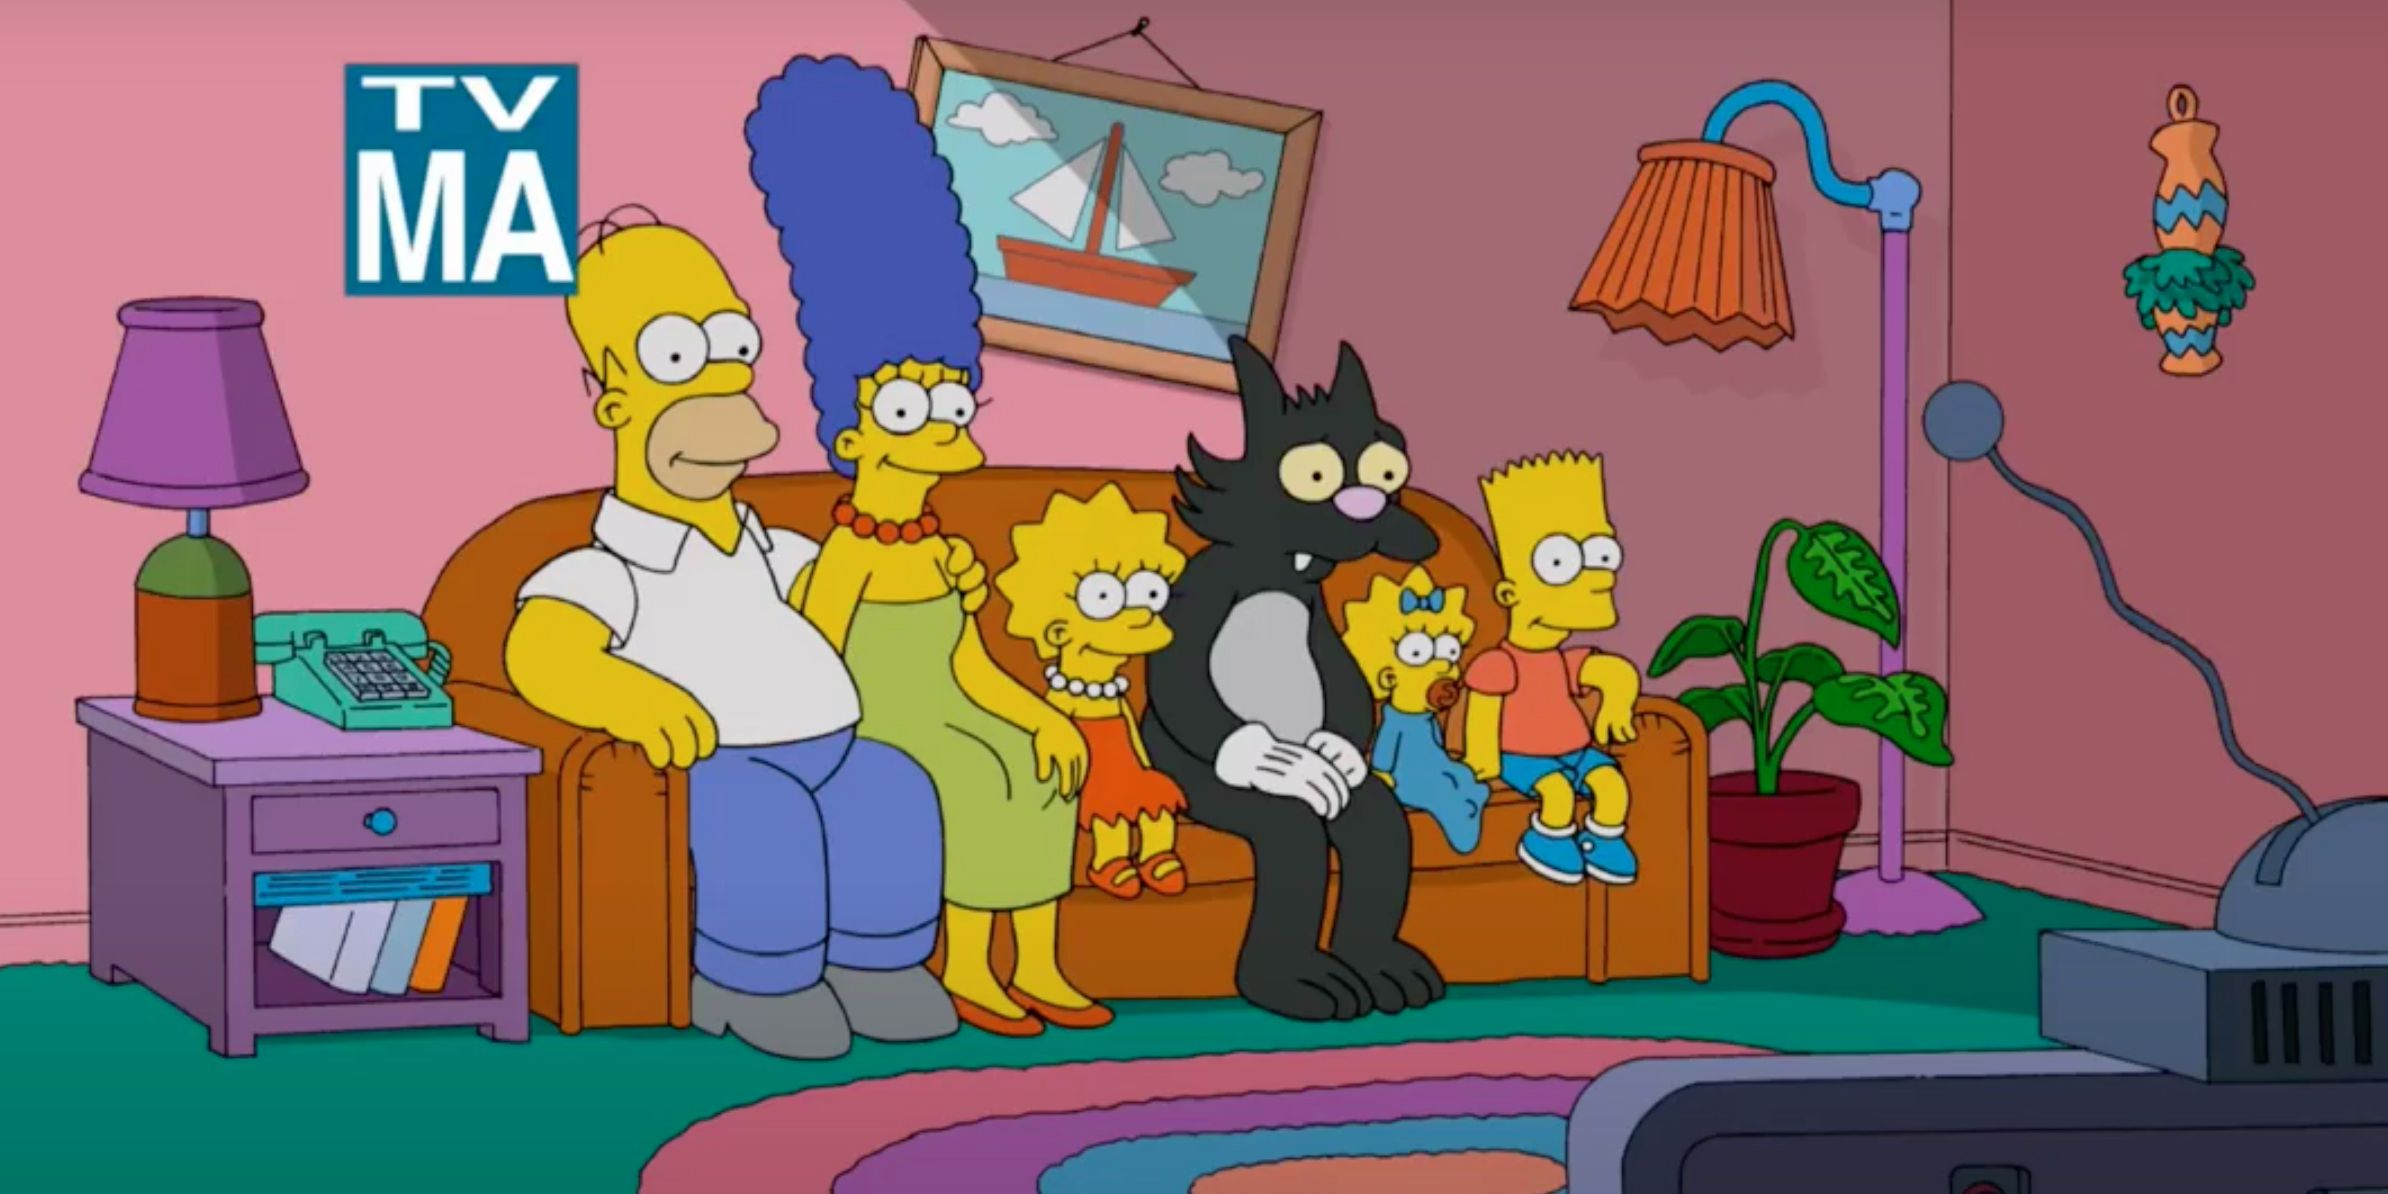 The Simpsons Only TV-MA Episode Is Censored on Disney+